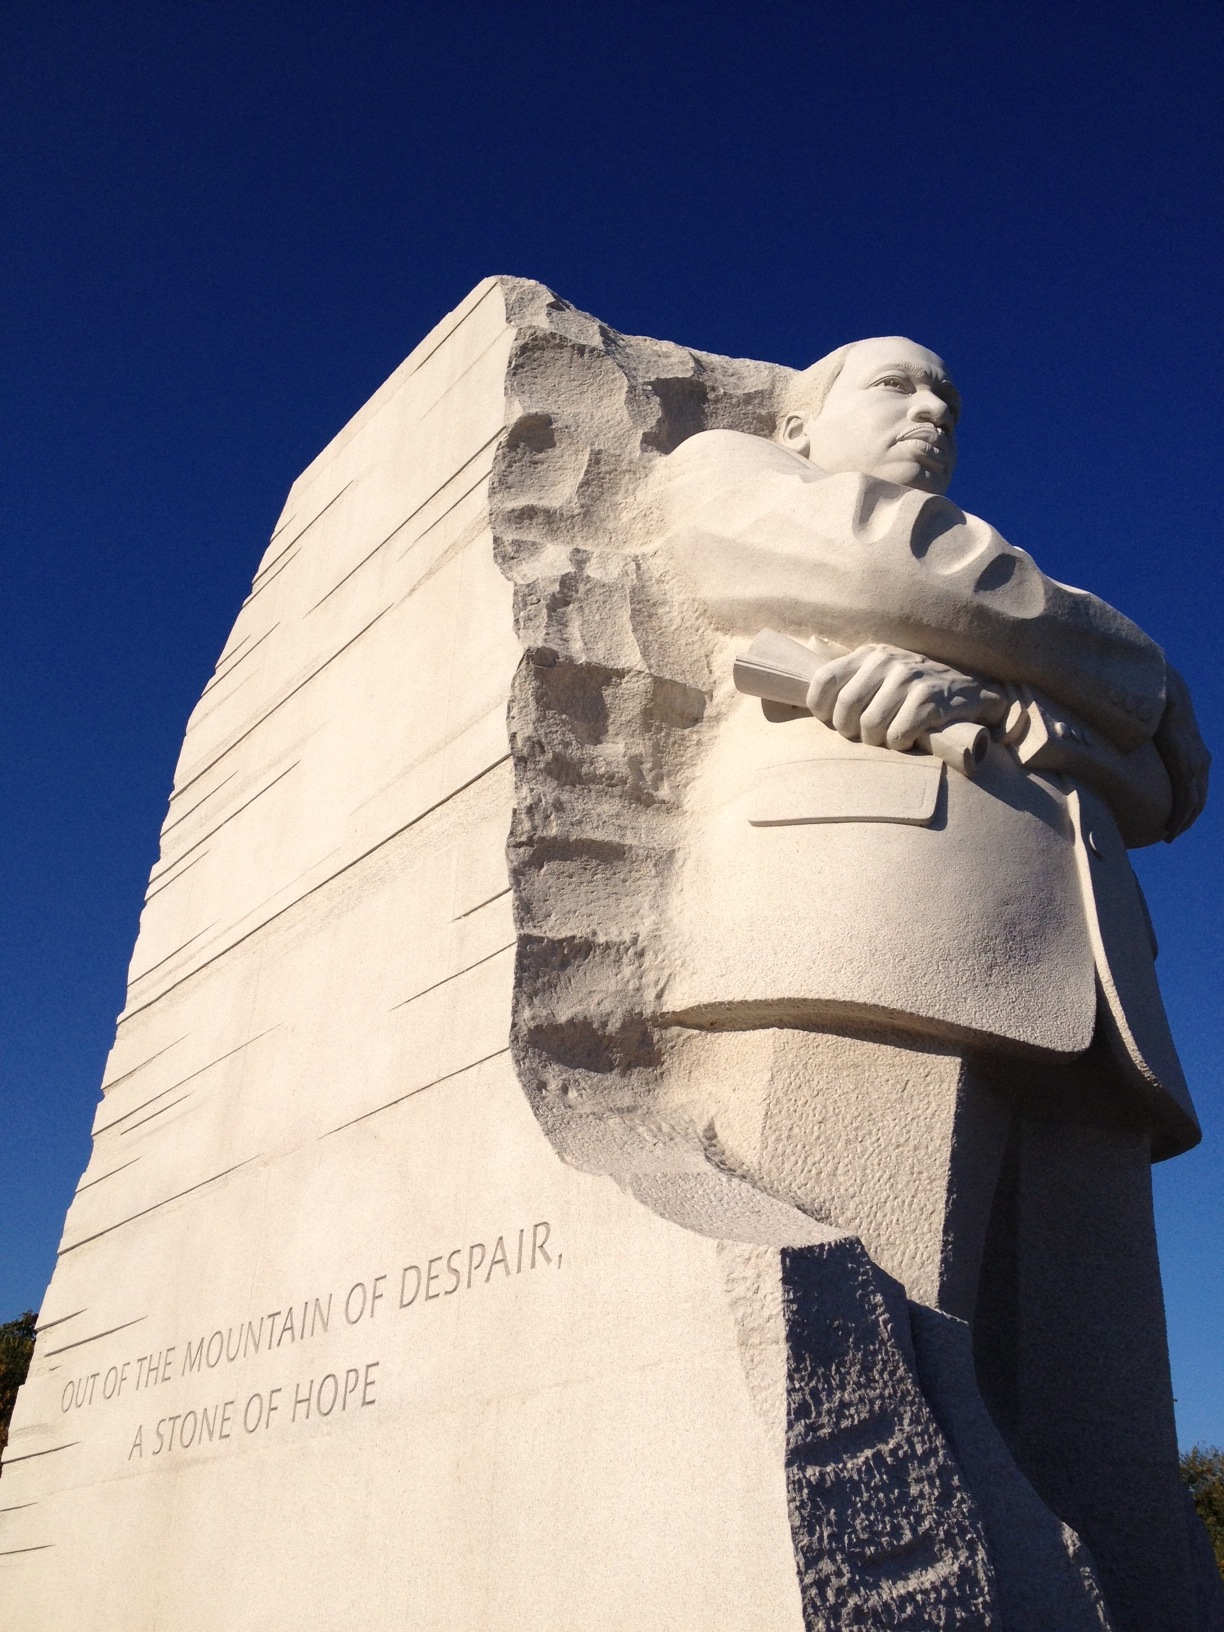 How To Fix the MLK Memorial: Get a Writer on Board